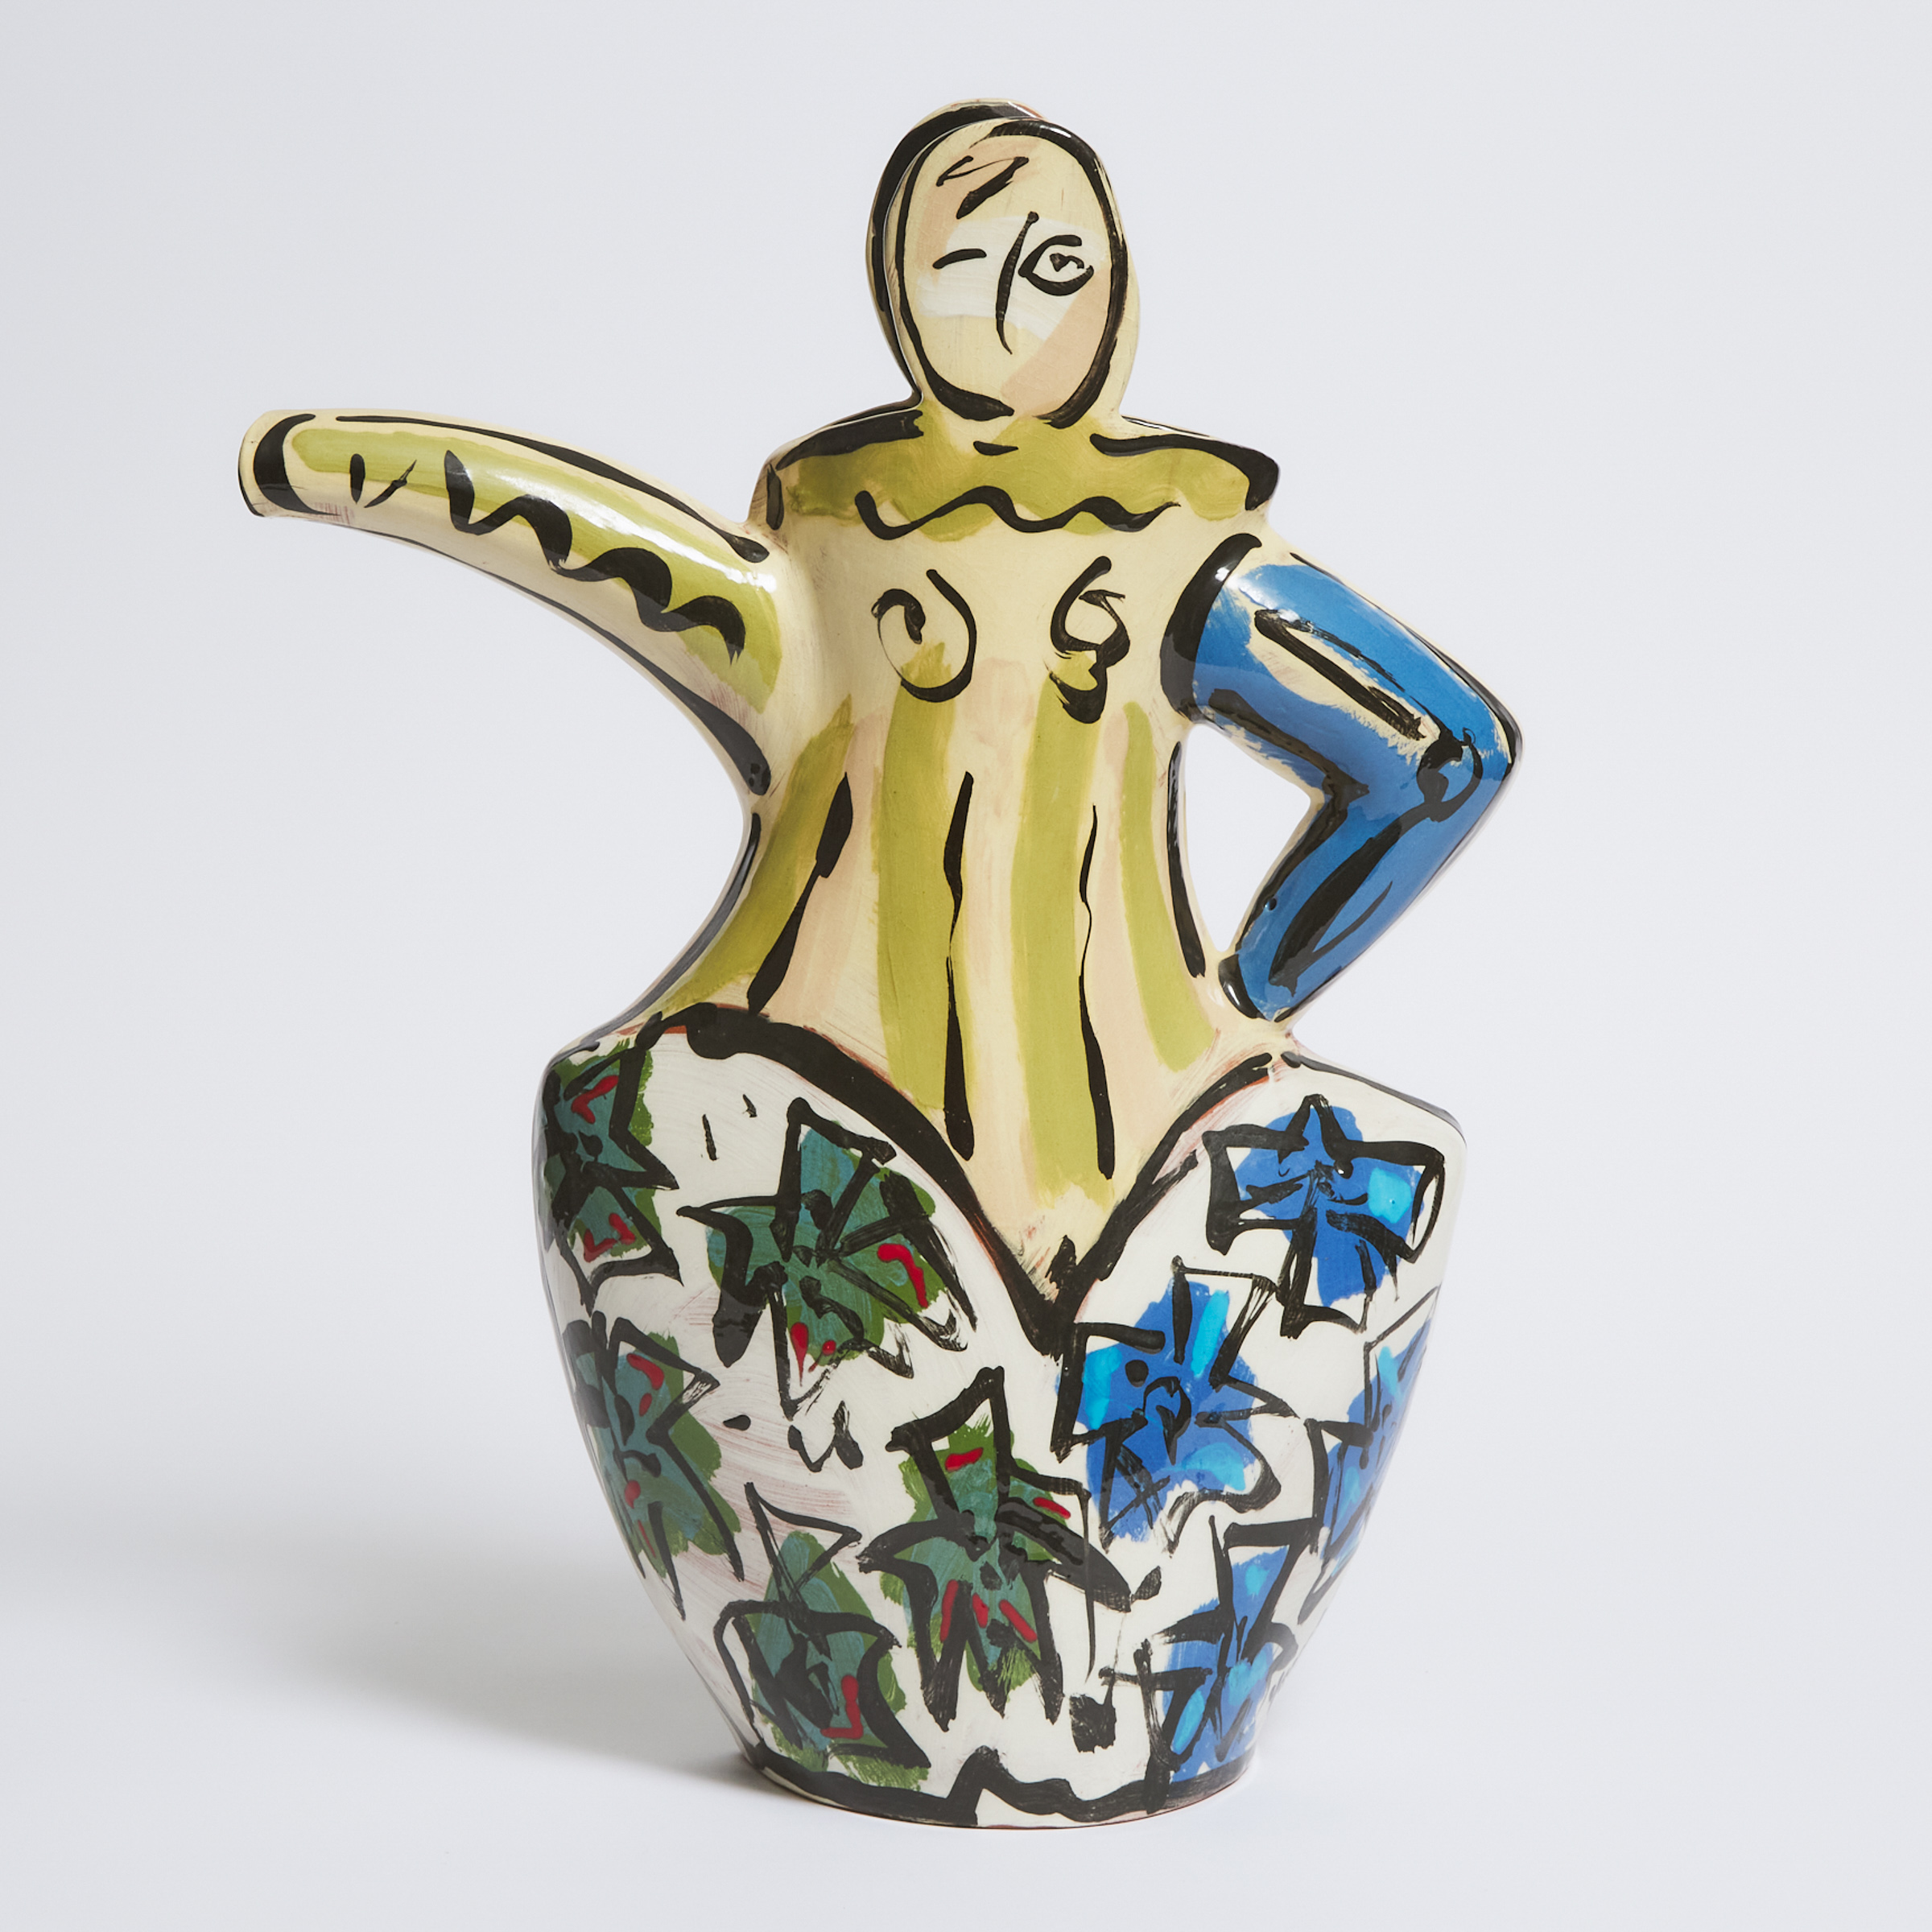 Kathryn Youngs (Canadian/American, b.1952) Figural Coffee Pot Sculpture, 1994